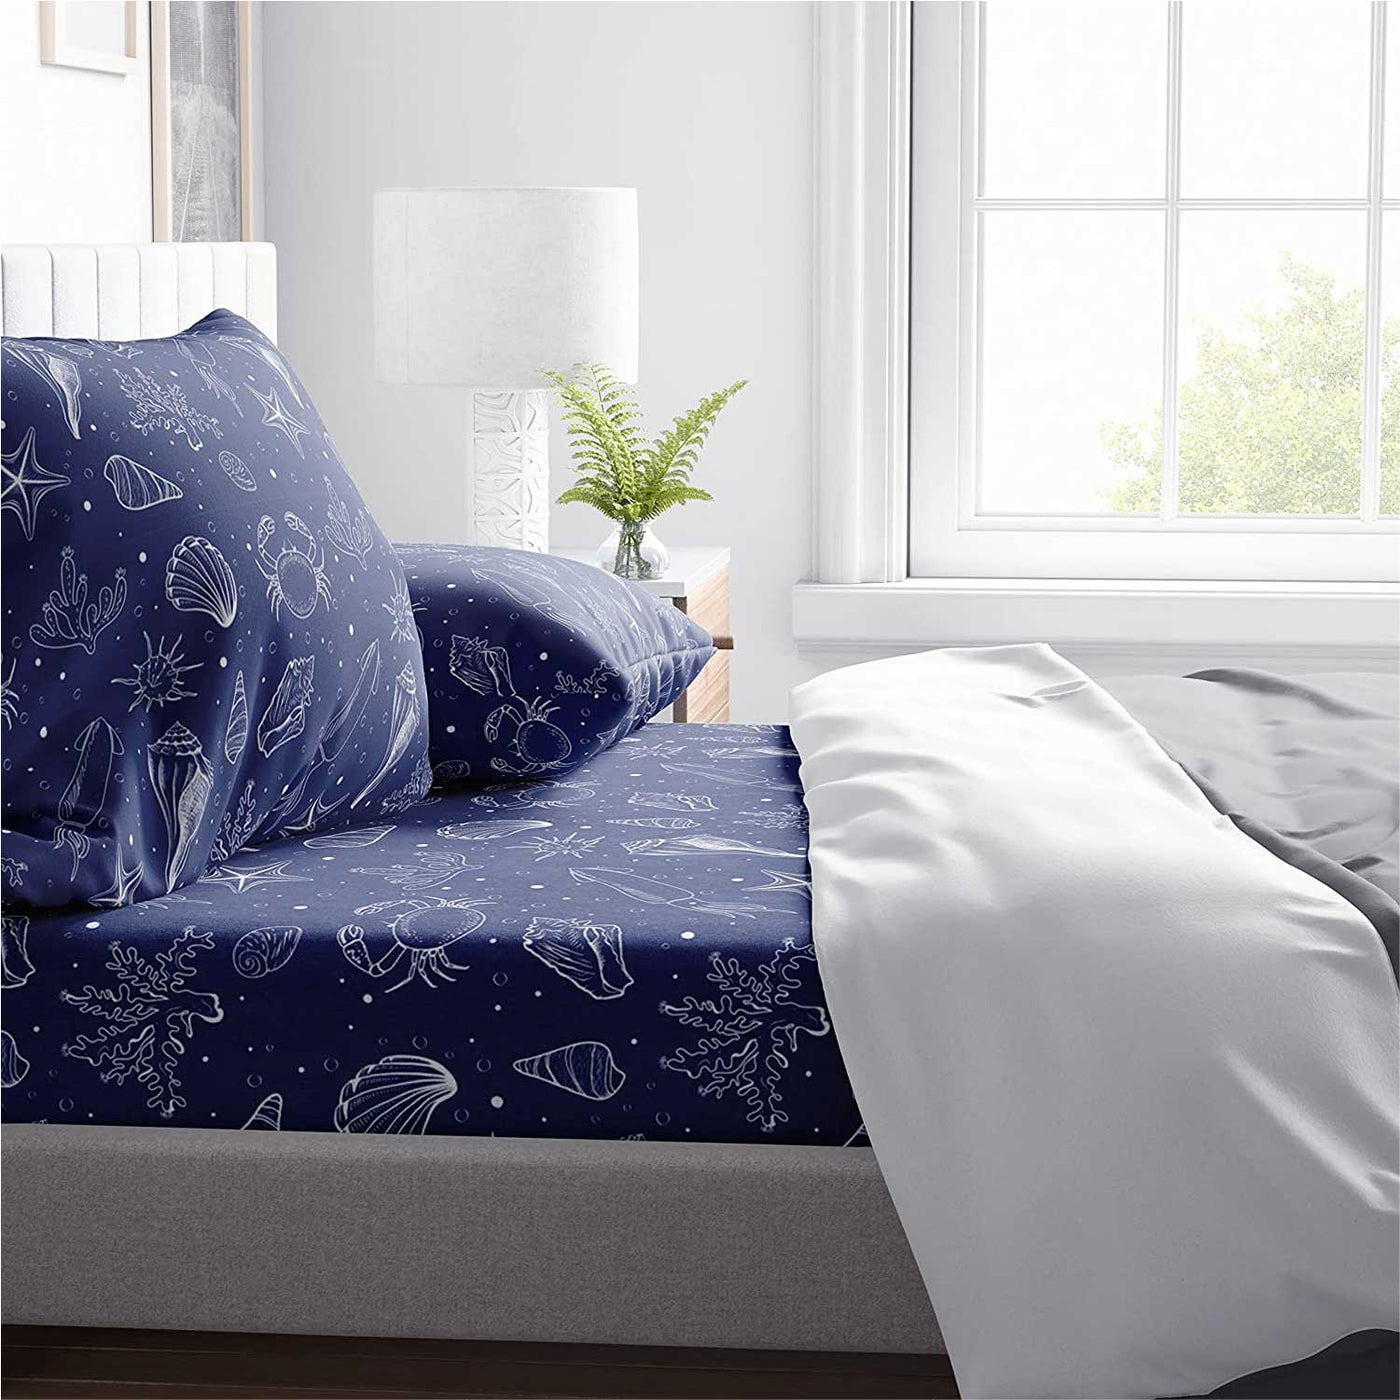 Printed 300 TC Egyptian Cotton 3 Piece Fitted Bed Sheet Set Winter Edition - Twilight Ocean